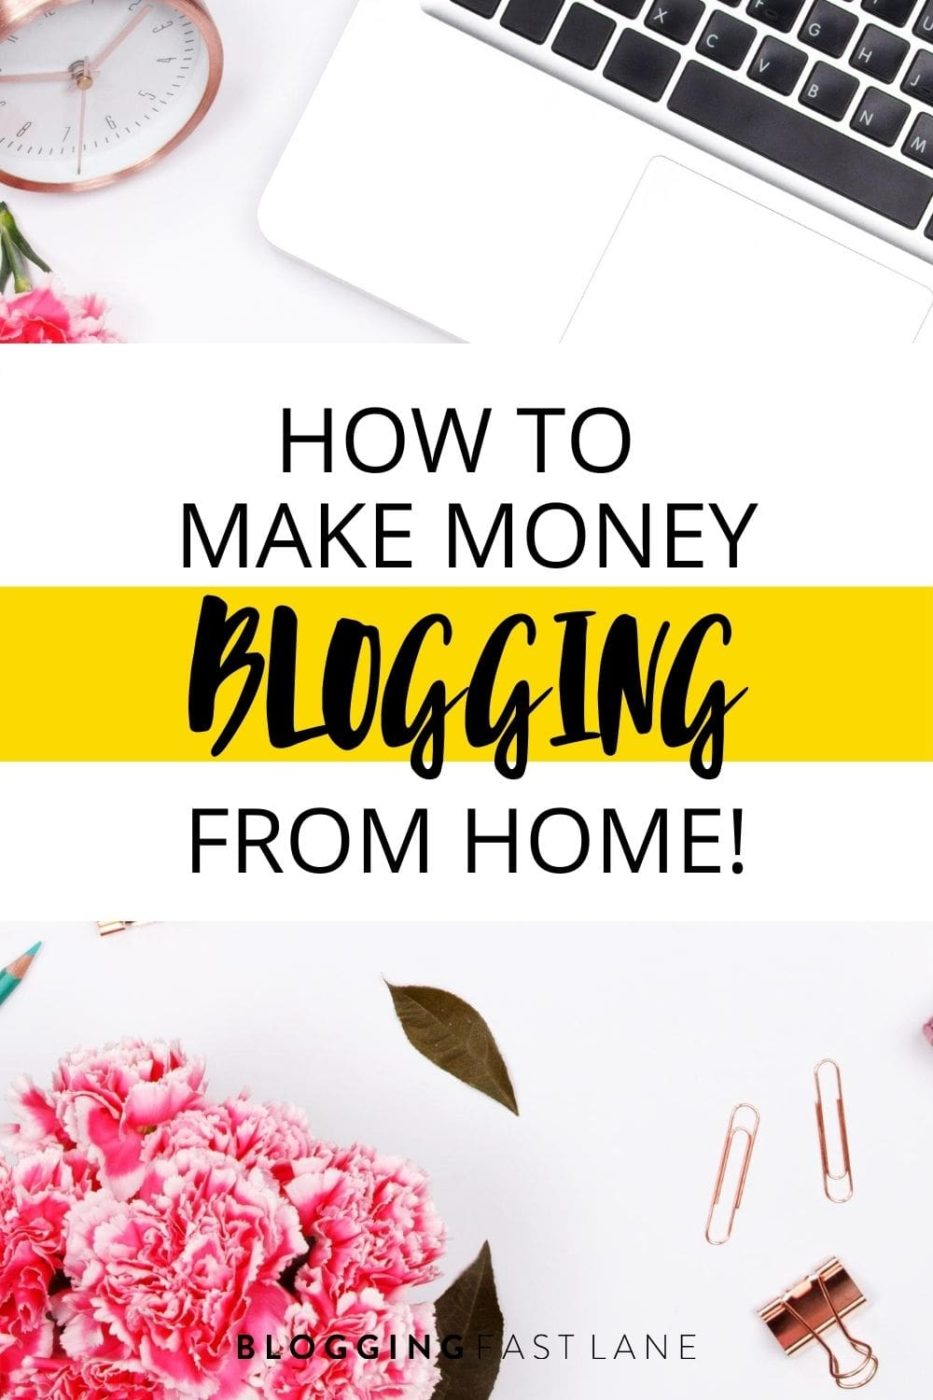 Making money blogging | Looking for ways how to make money from blogging? Take a look at these proven strategies. #blogging #makemoneyfromhome